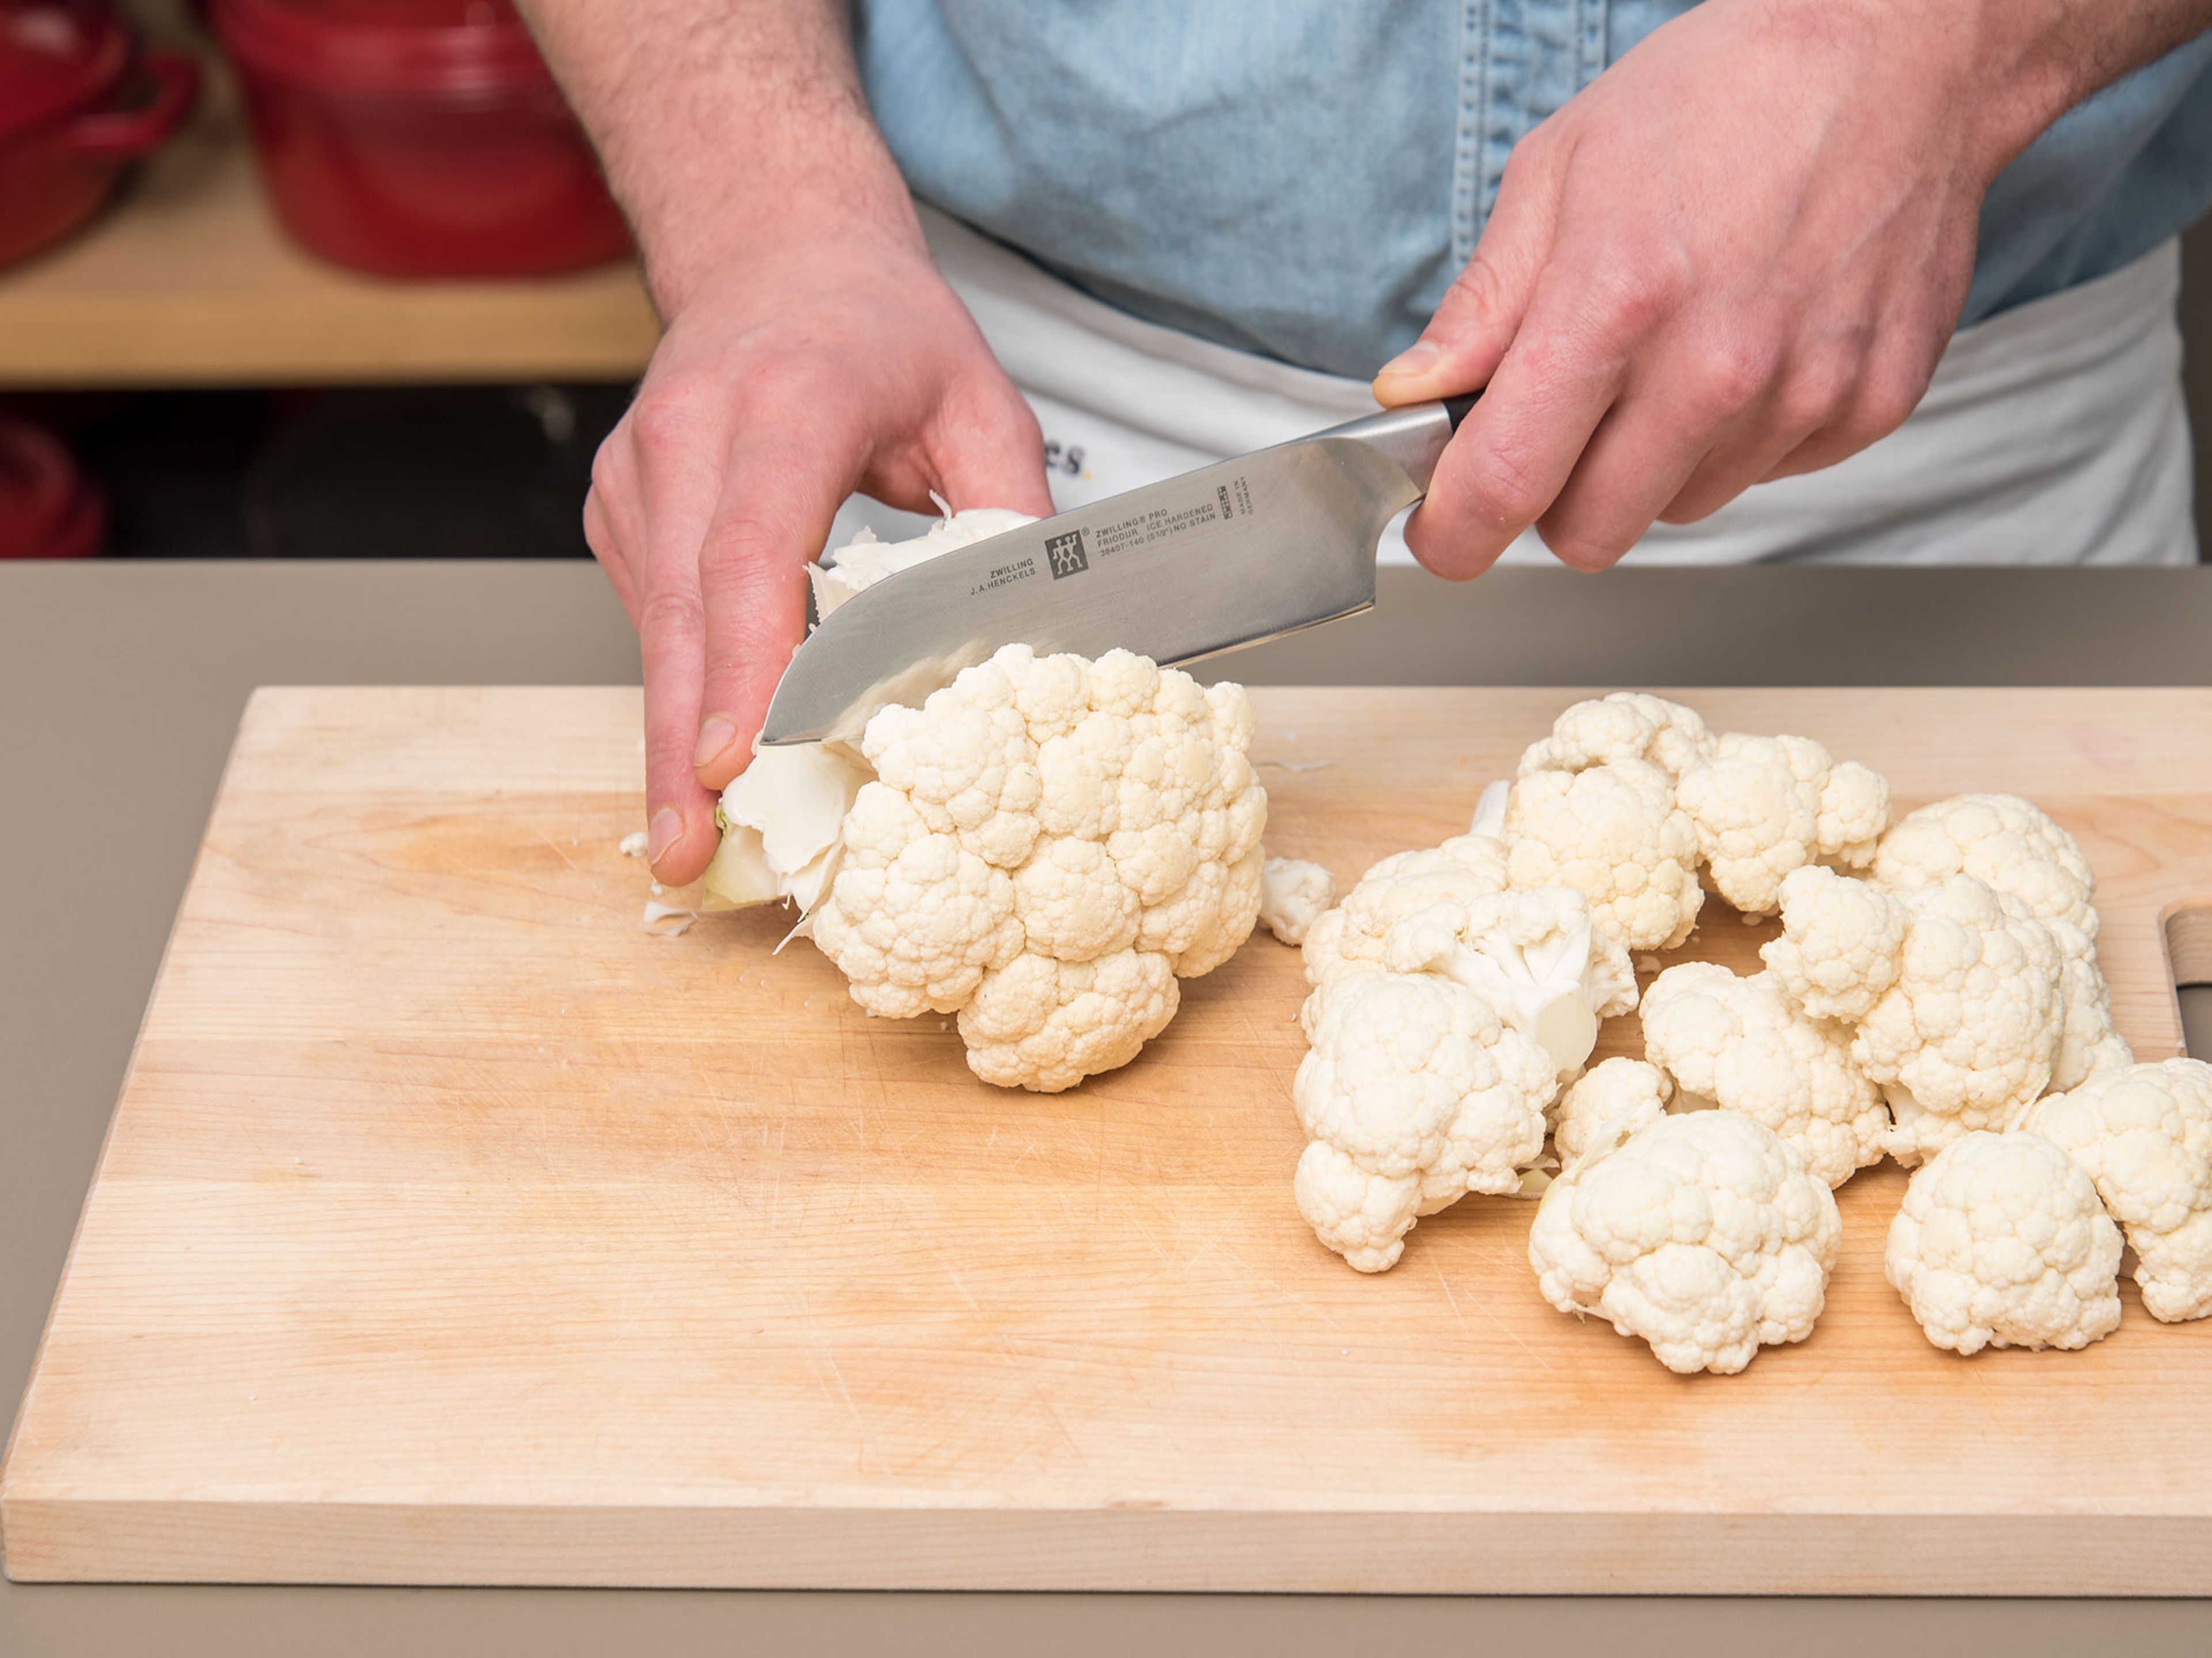 Preheat the oven to 180°C/360°F. Bring water to a boil and salt generously. Cut the cauliflower into florets and cook in salted boiling water for approx. 4 - 5 min. Strain califlower into colander and drain.